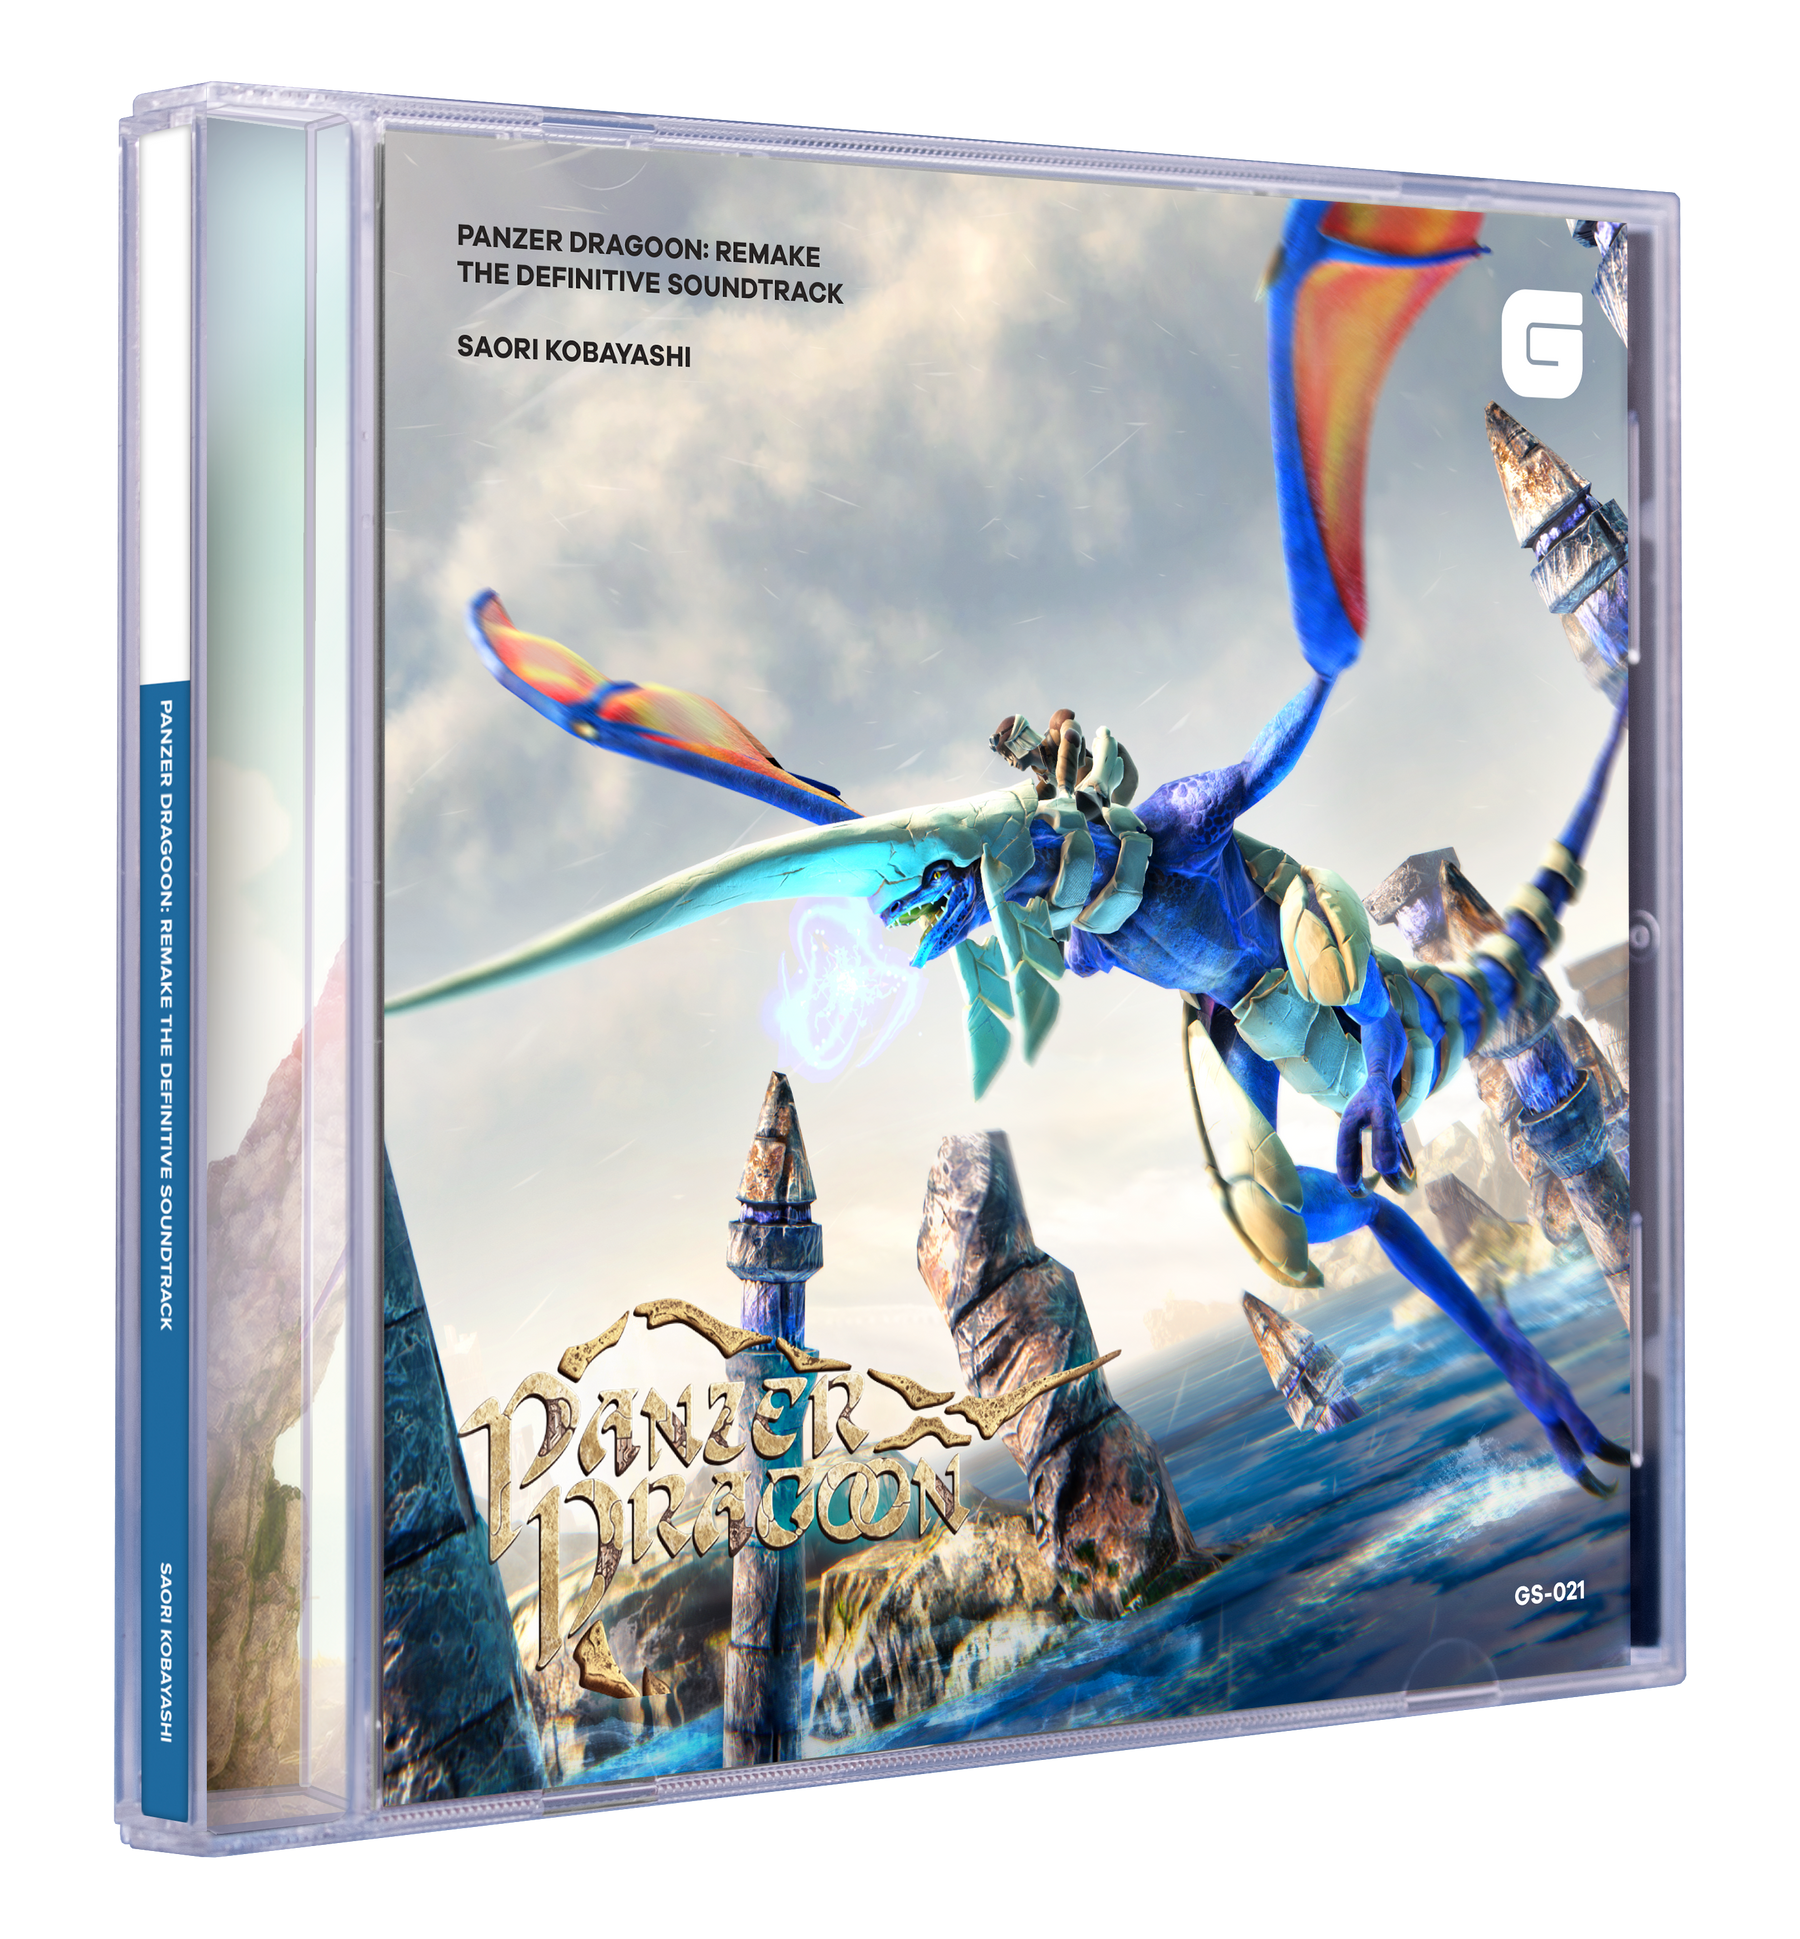 Panzer Dragoon: Remake - The Definitive Soundtrack - CD